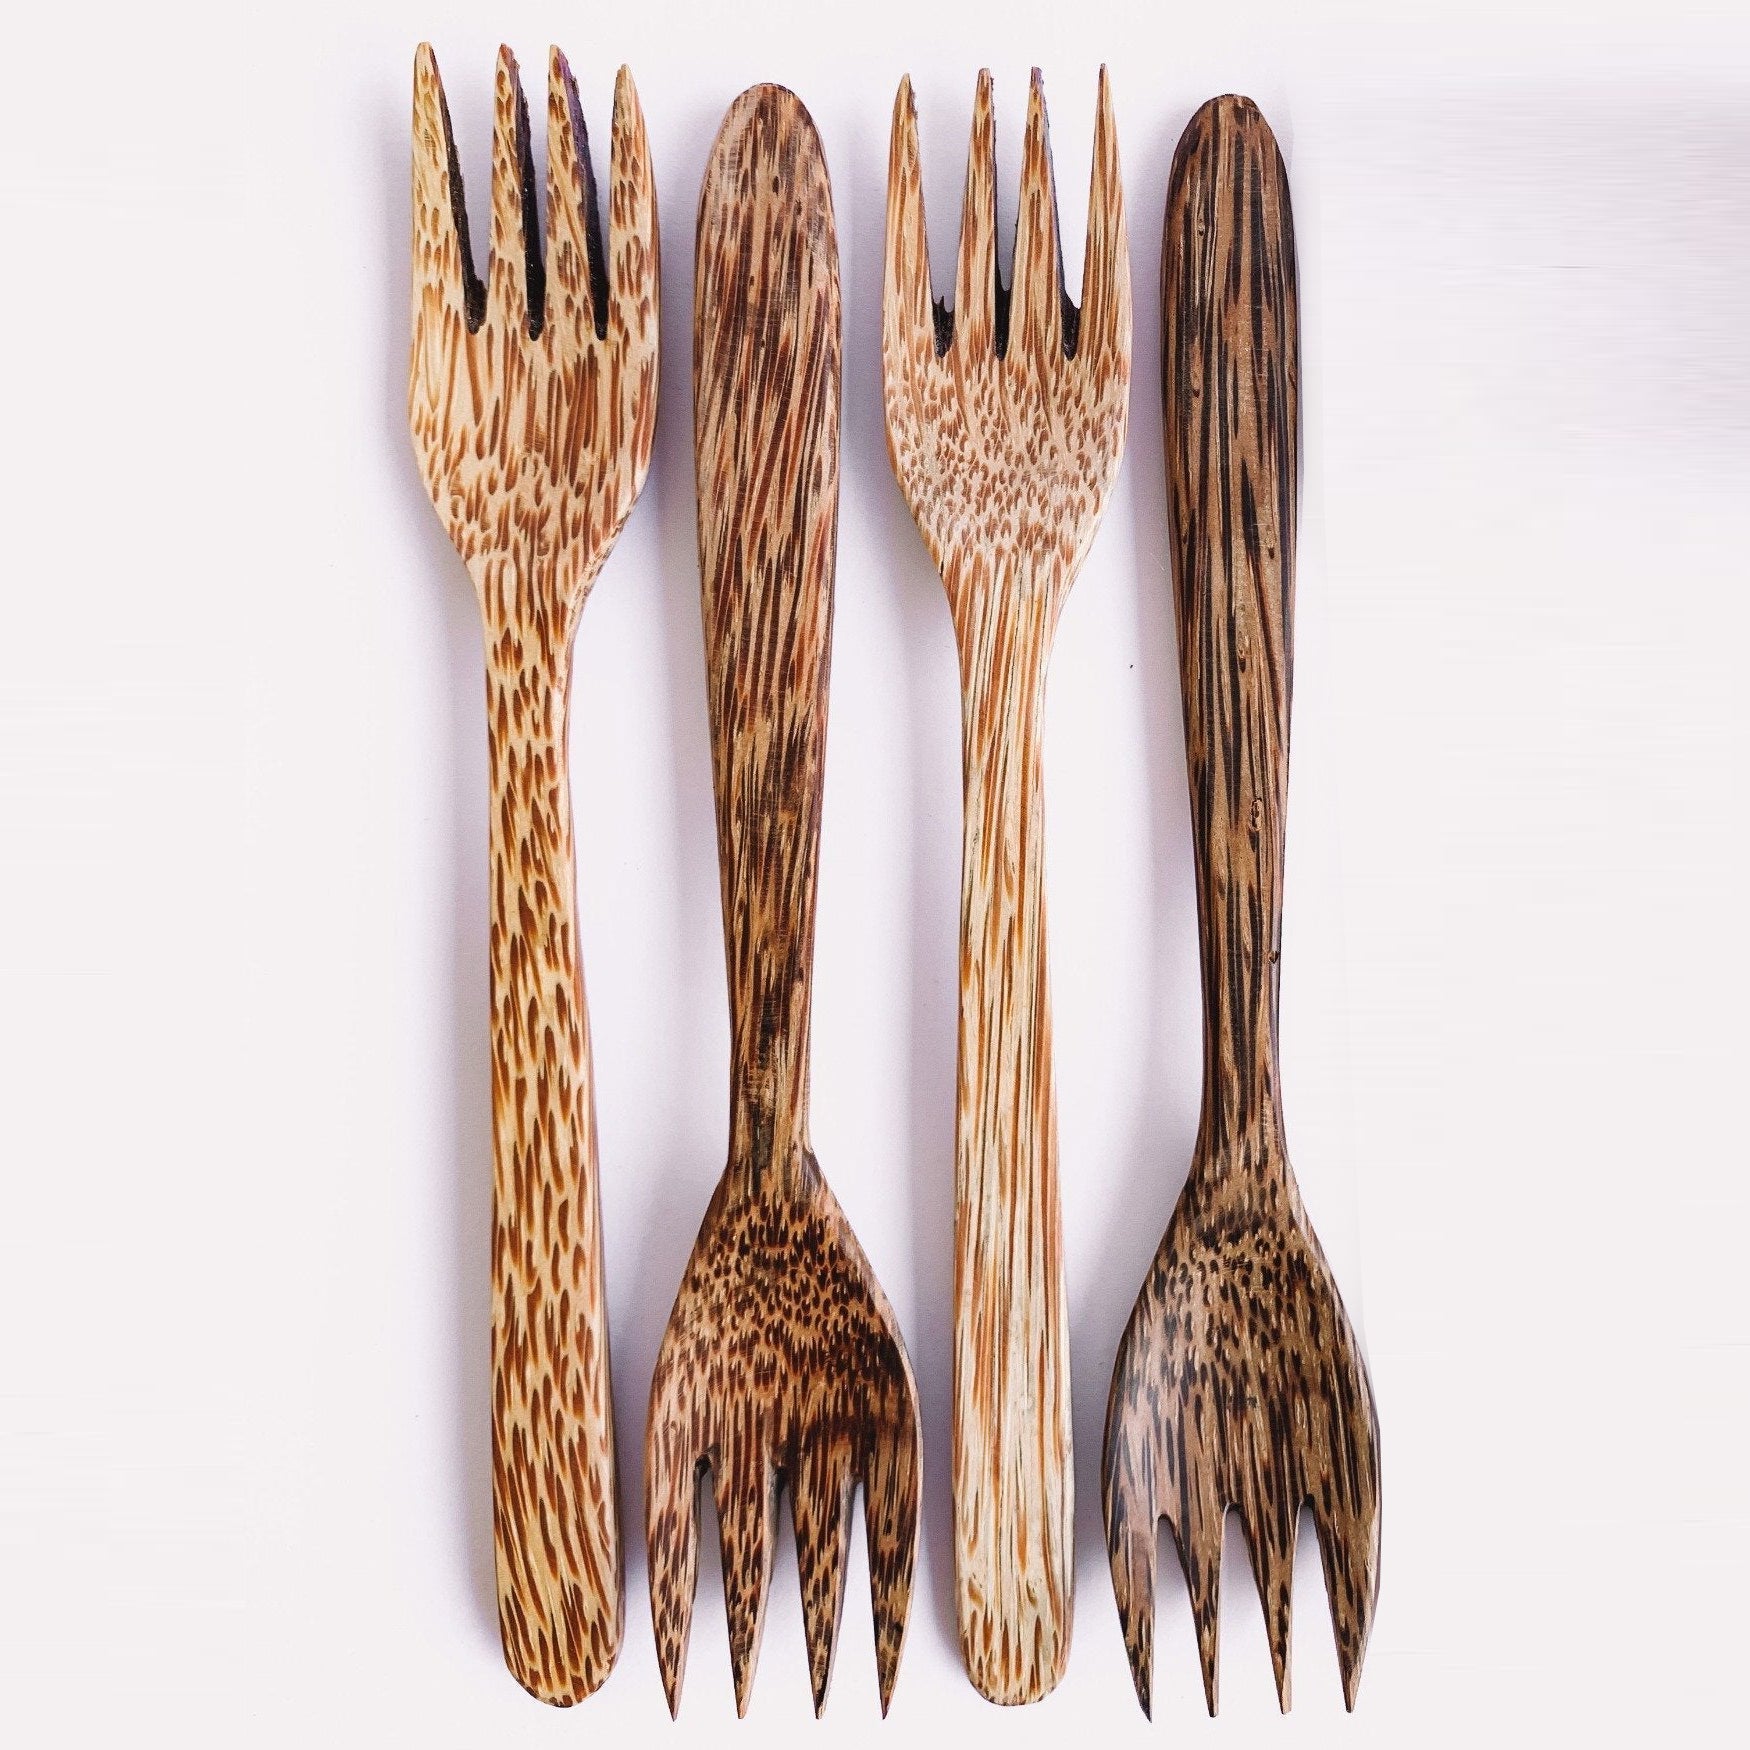 Coconut Forks | Biodegradable Cutlery